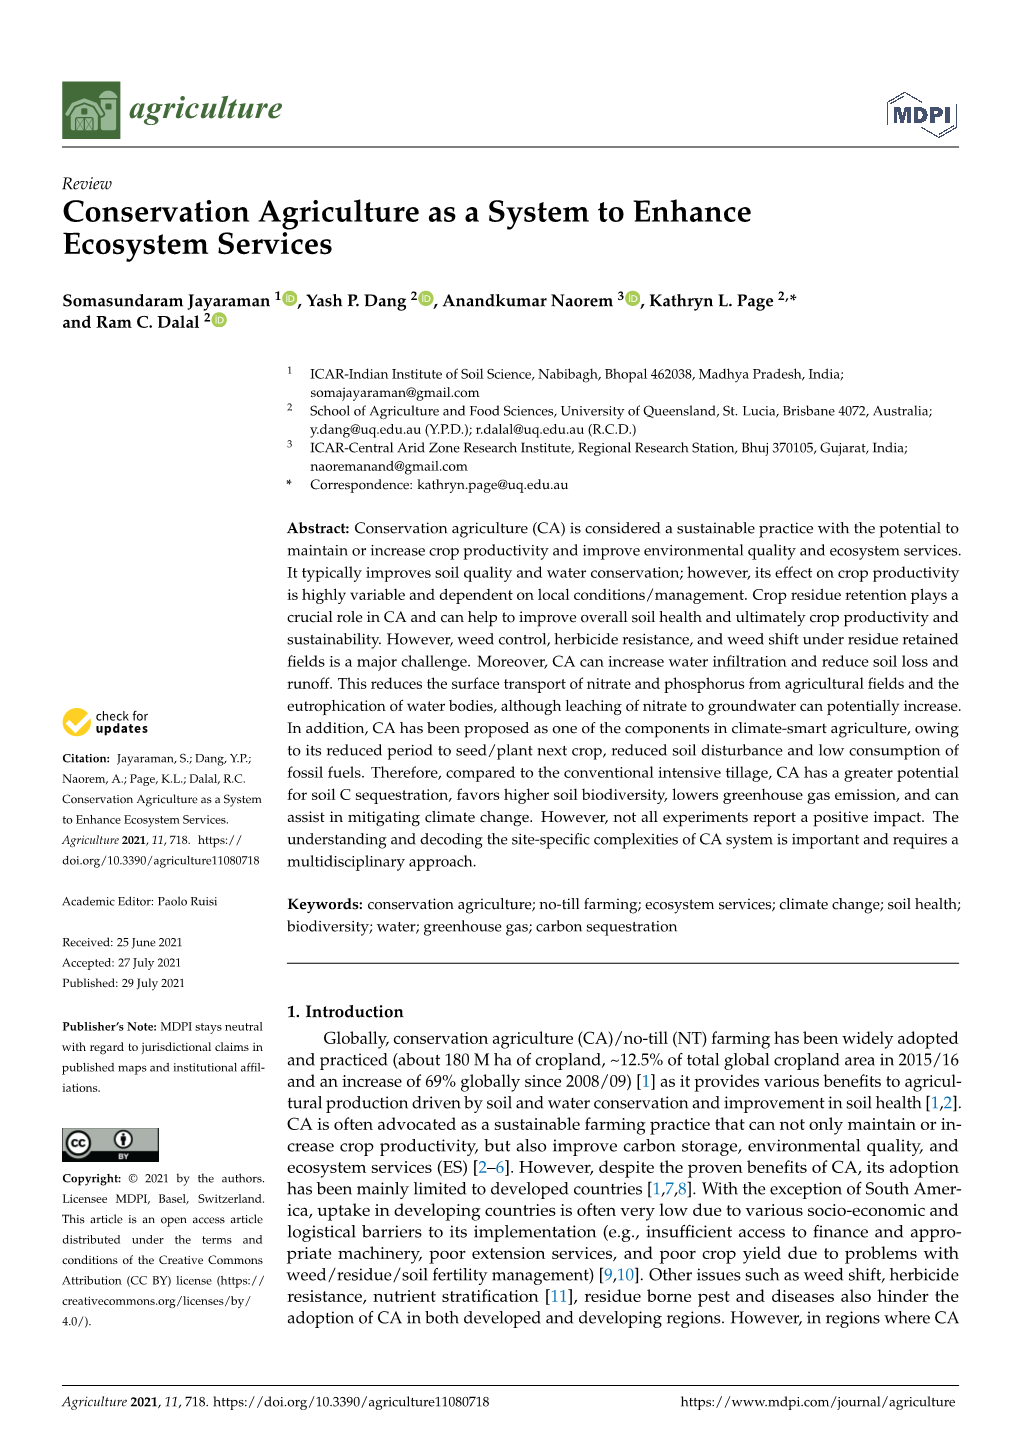 Conservation Agriculture As a System to Enhance Ecosystem Services